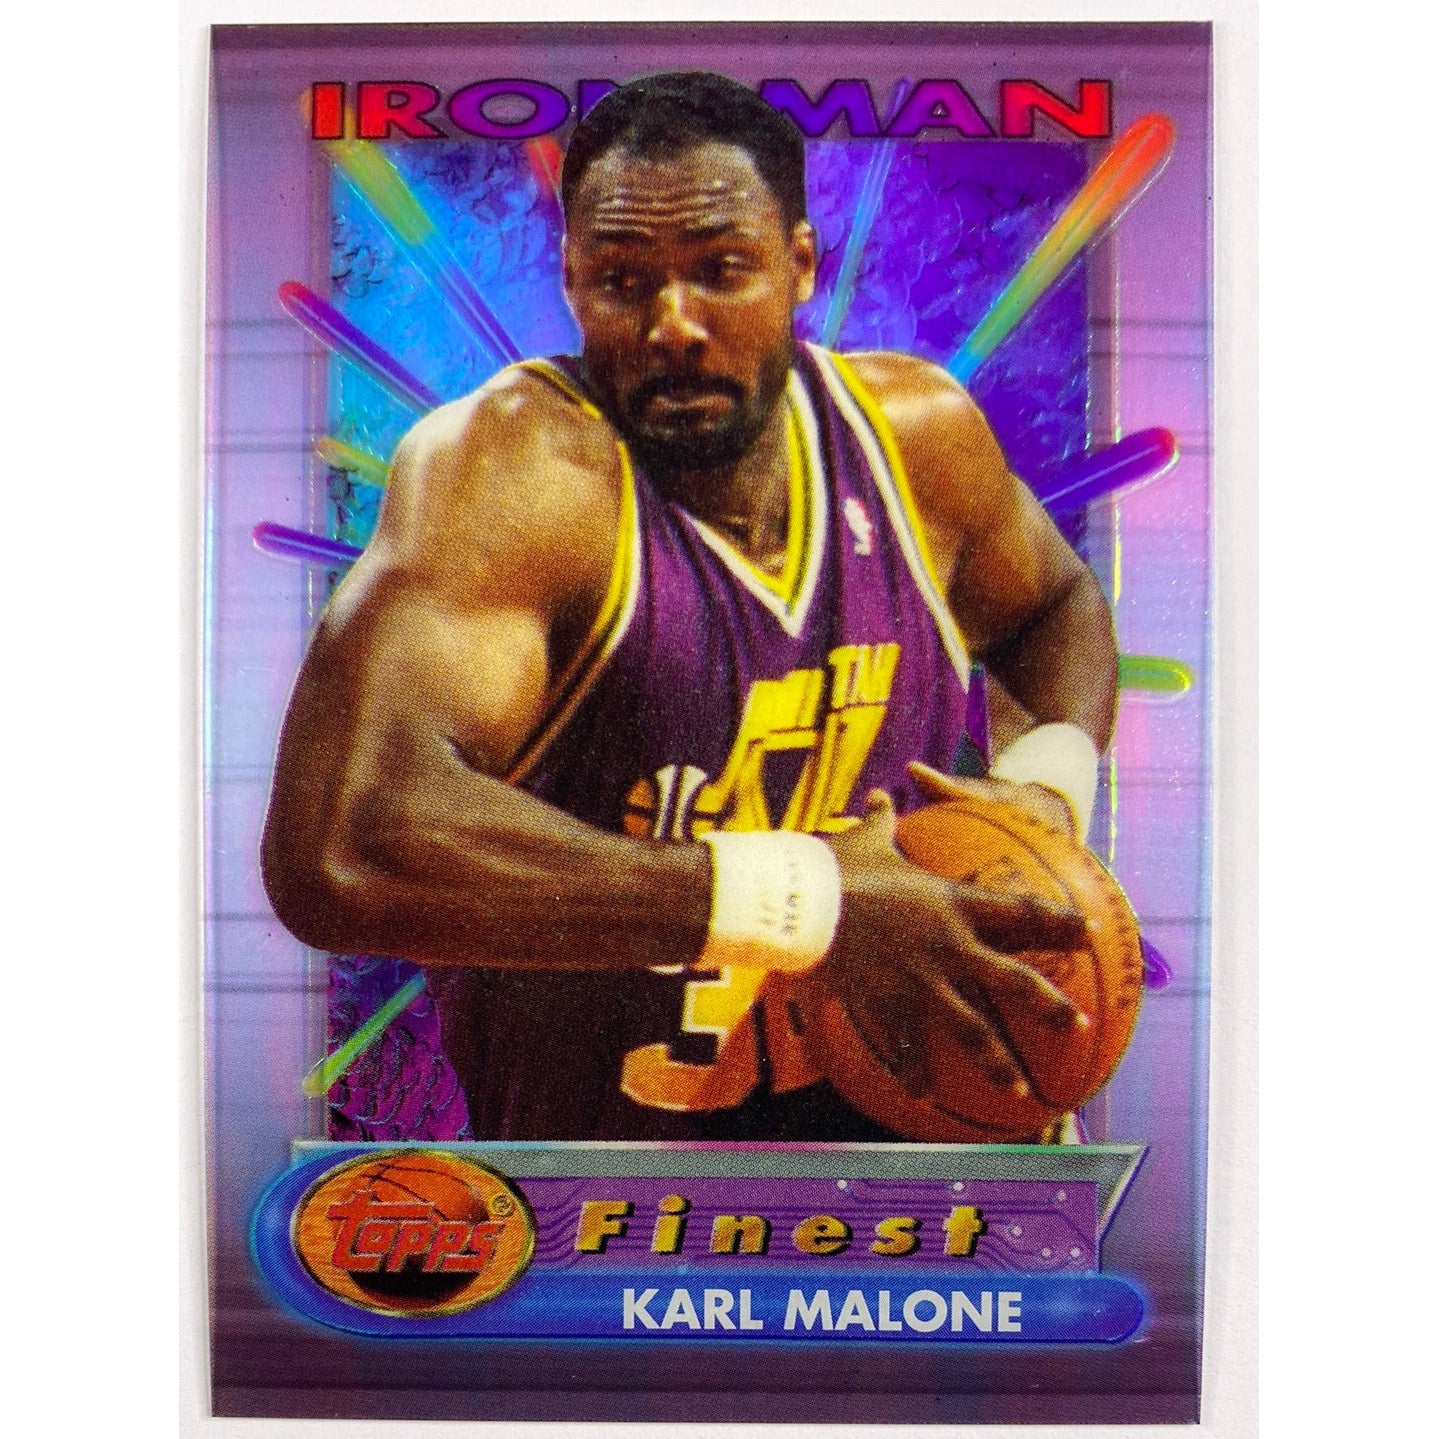 1994-95 Topps Finest Karl Malone Ironman Clear Cut Refractor